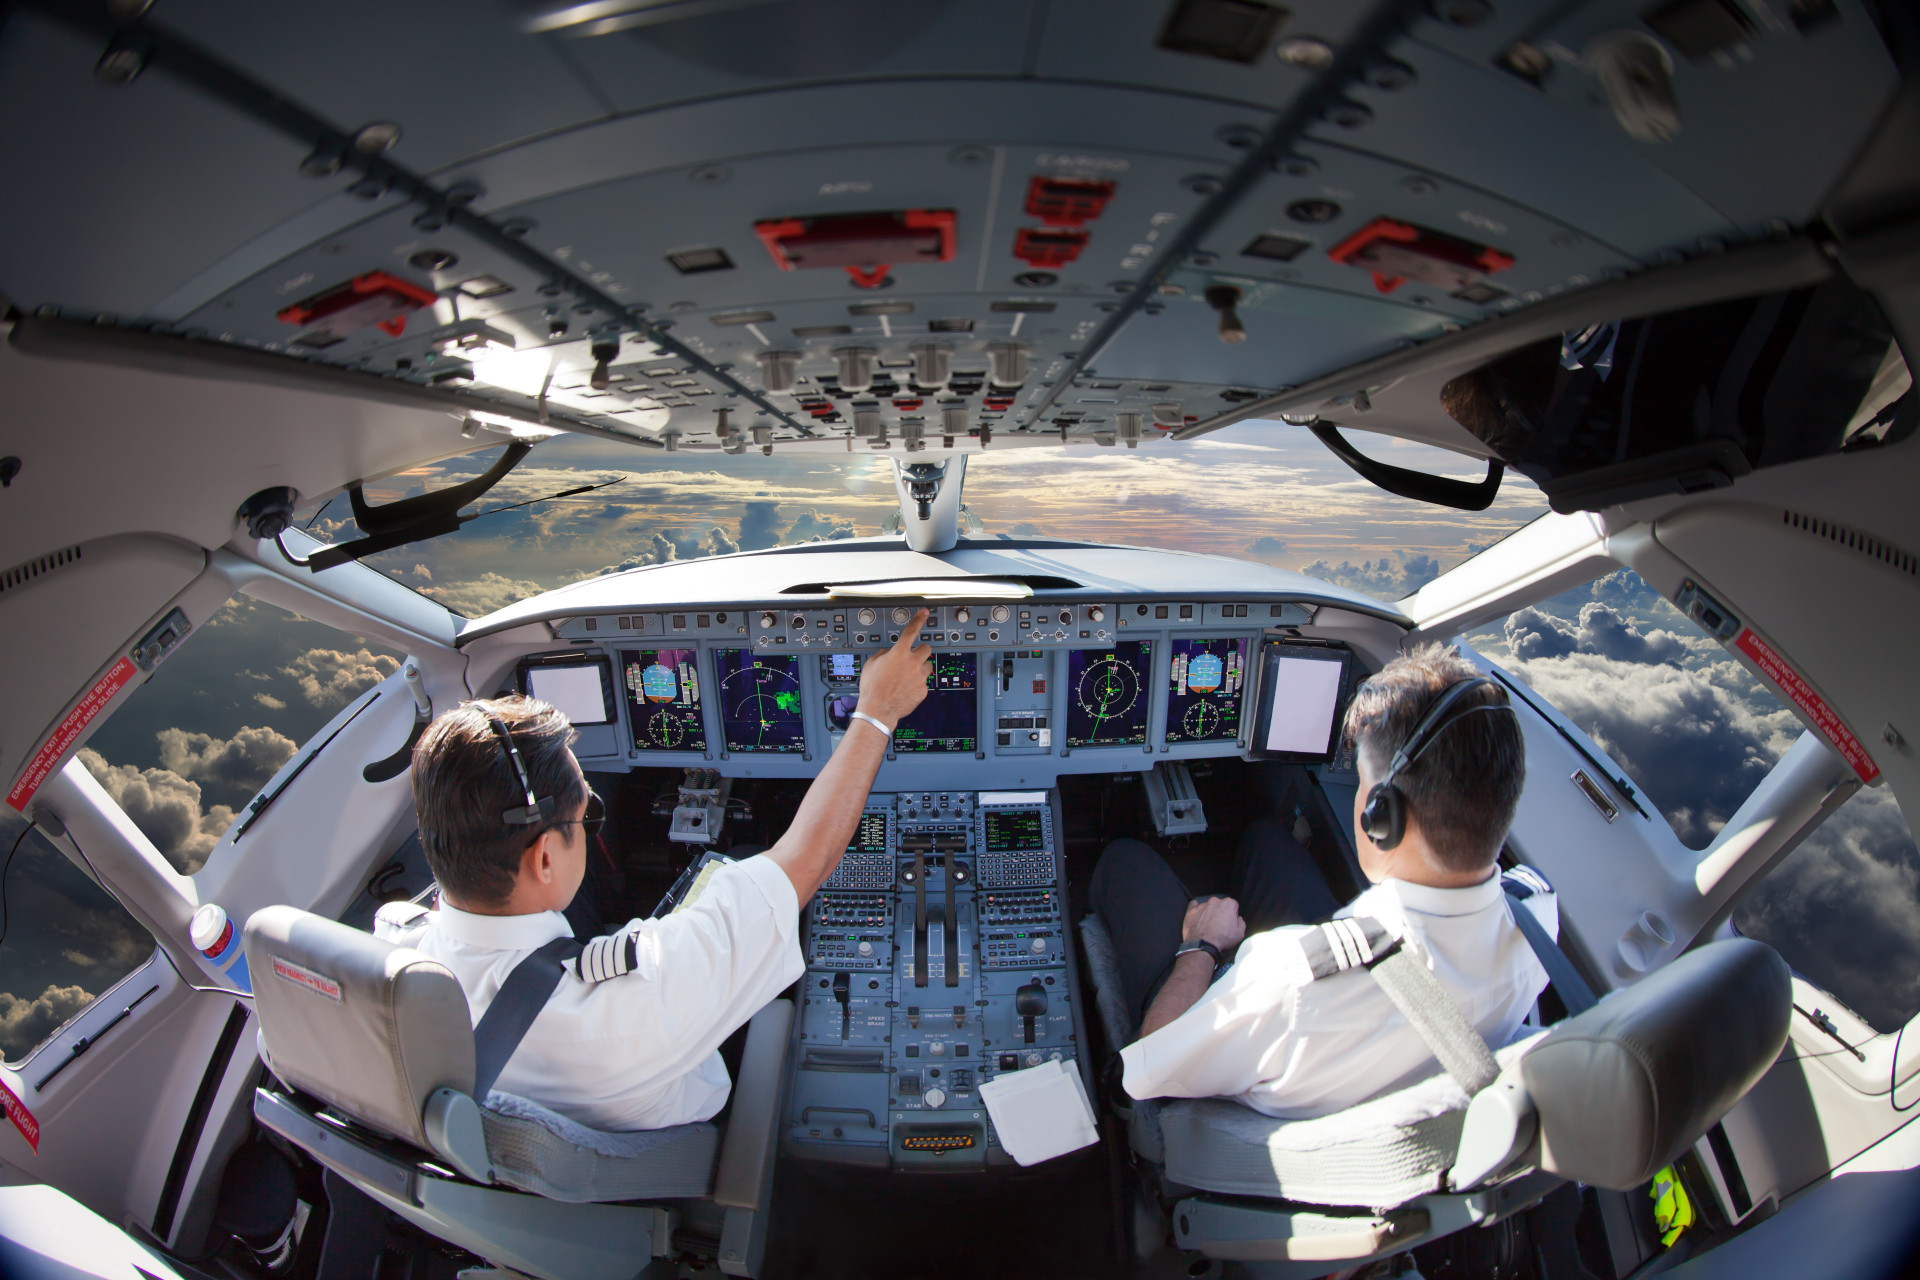 Apart from the discounted fares and travel perks, airline pilots also earn well—anywhere between US$100,000 to US$180,000, according to Time Money (although wages depend on many factors).<p>You may also like:<a href="https://www.starsinsider.com/n/417526?utm_source=msn.com&utm_medium=display&utm_campaign=referral_description&utm_content=240533v6en-in"> How 2020 will be, based on your Chinese horoscope</a></p>